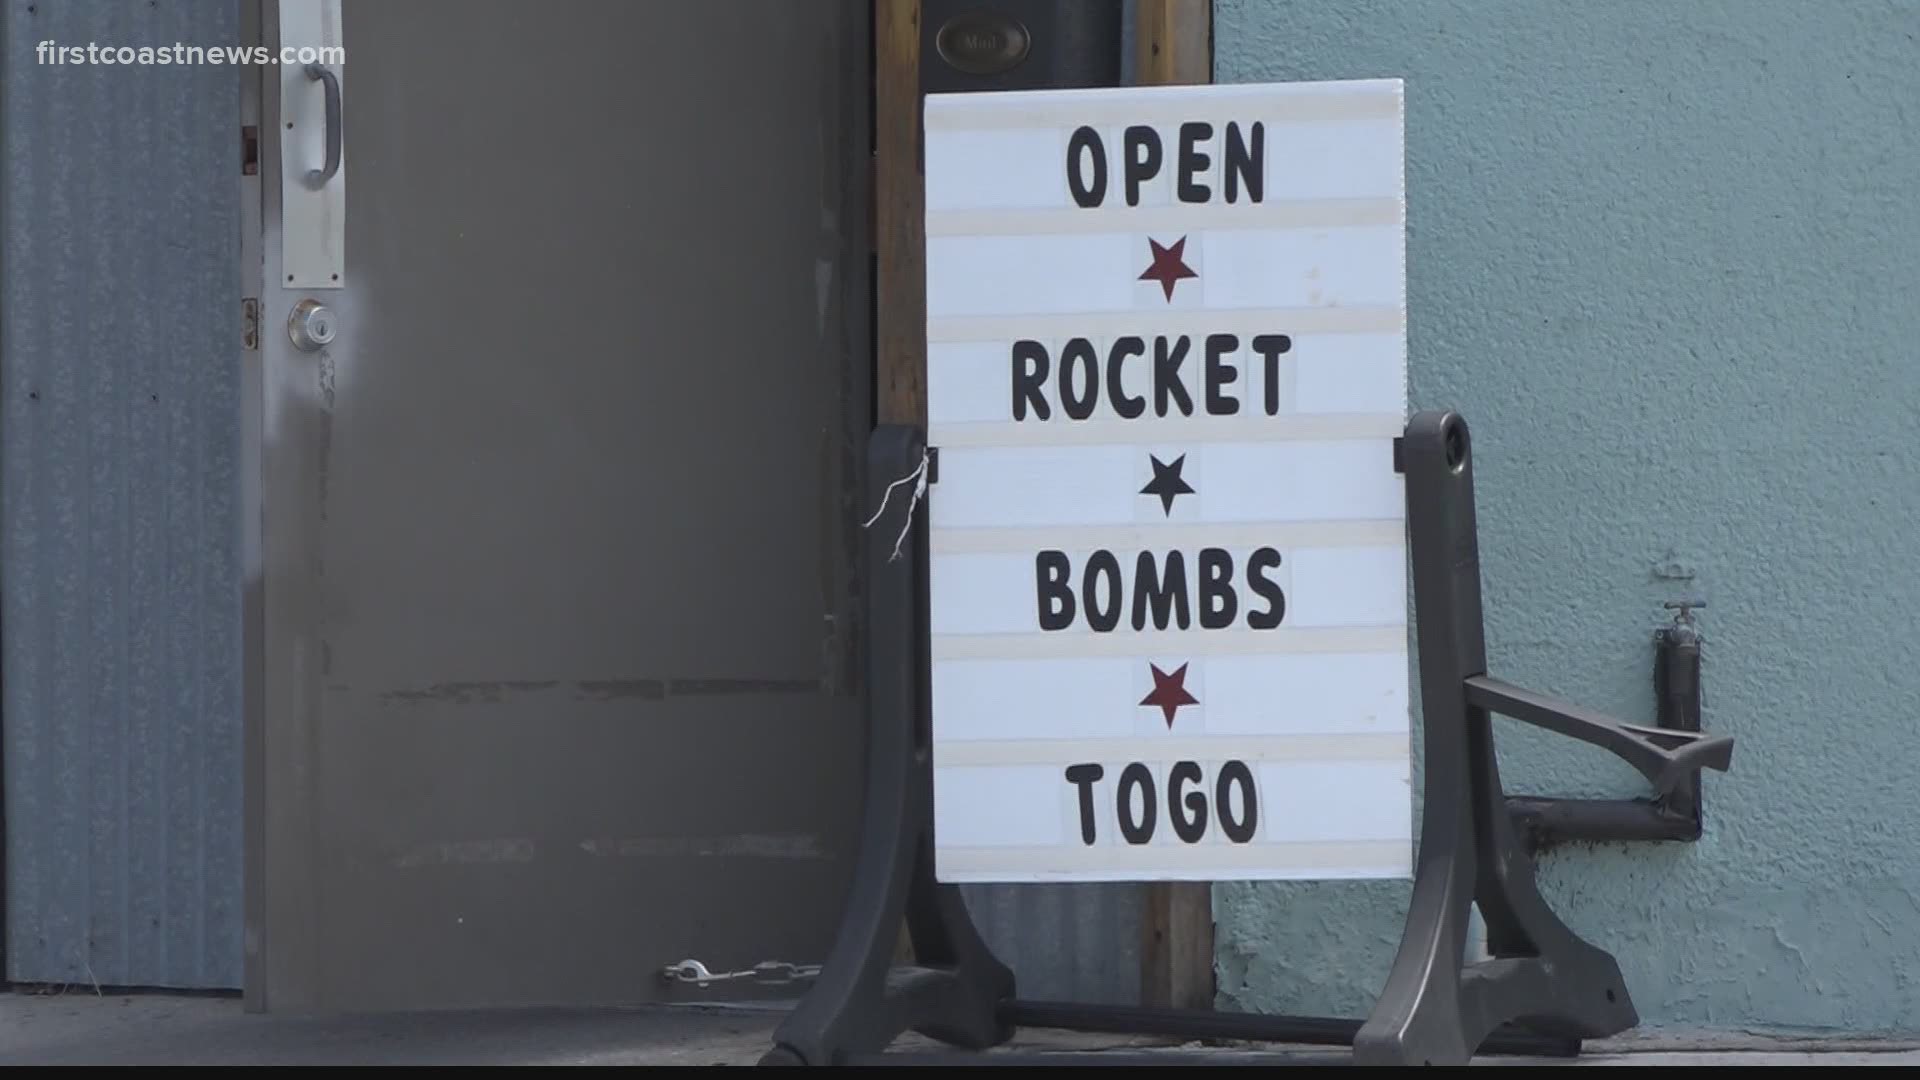 The owner of a Jacksonville Beach bar reacts to the cancellation of this year's Fourth of July fireworks amid COVID-19 concerns.